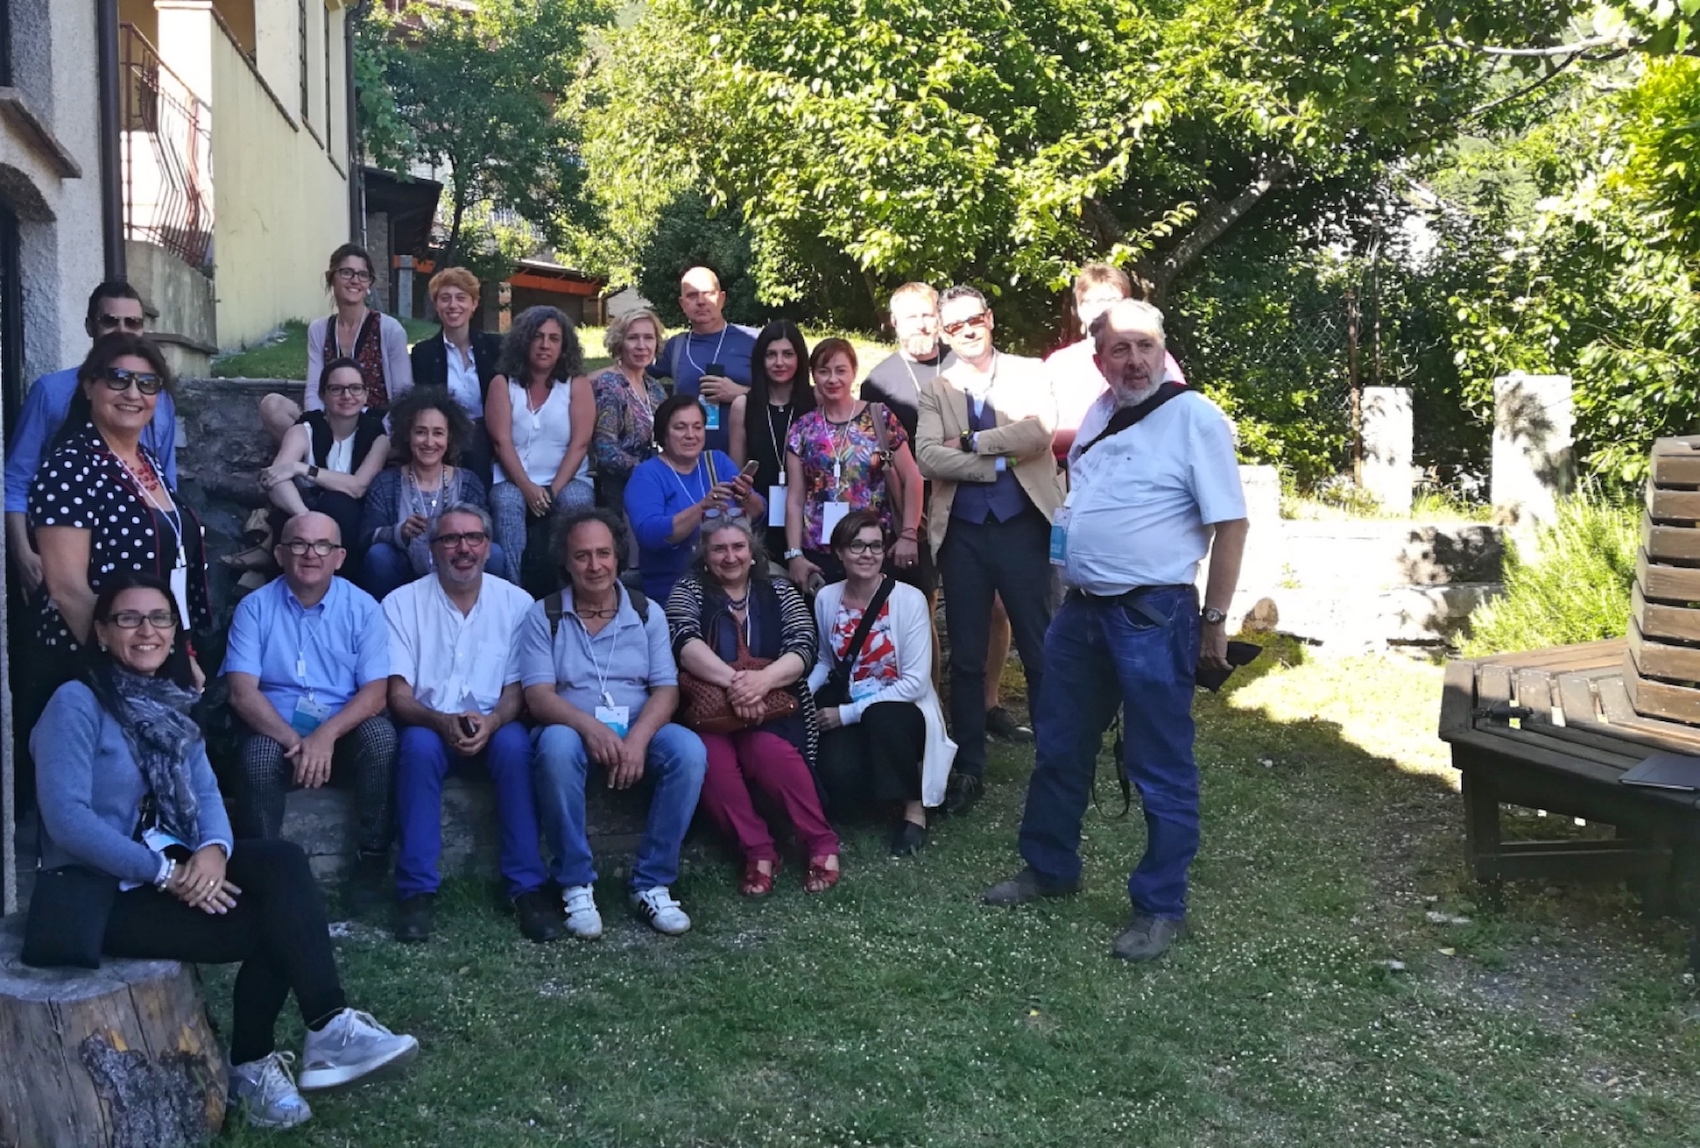 A CLAY diary, kick off meeting in Assisi